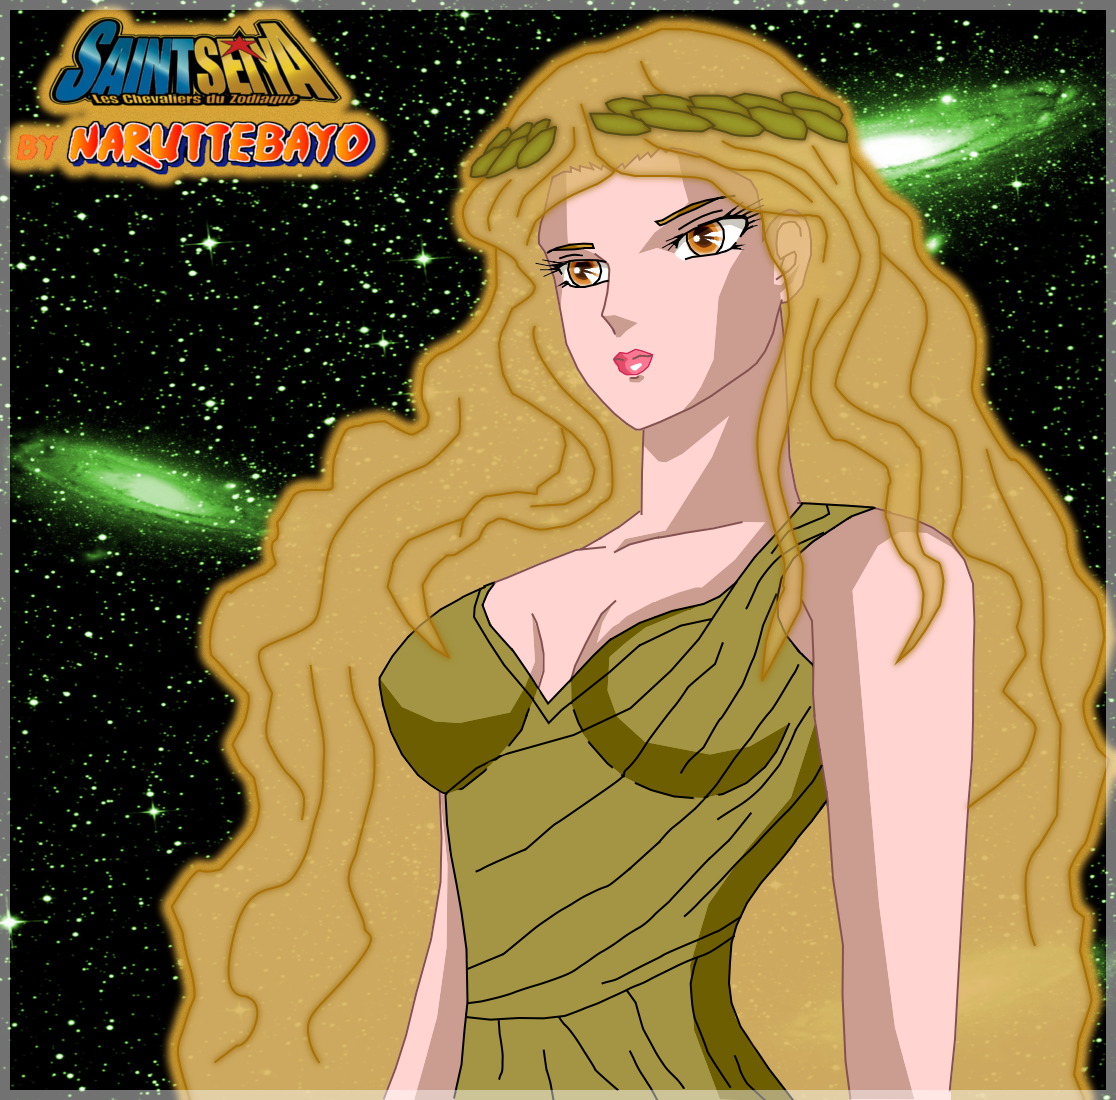 coloring buste demeter by Narutto67 on DeviantArt